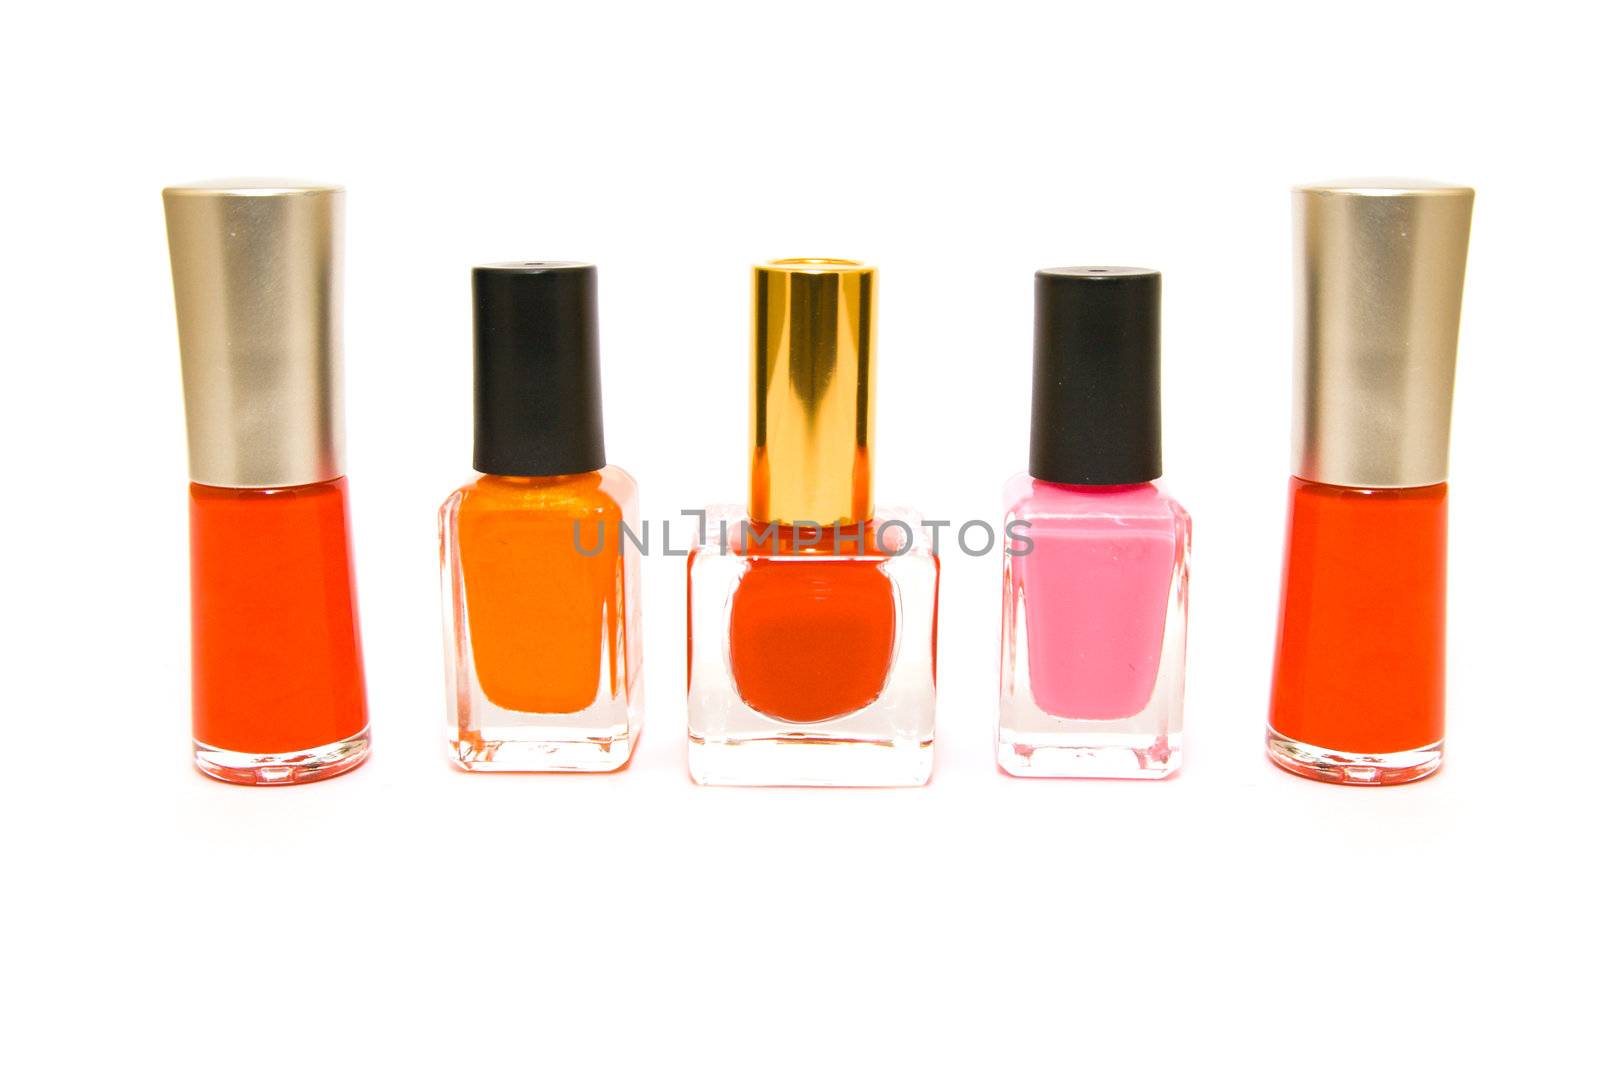 Five Bottles of Nail Polish by KeithWilson